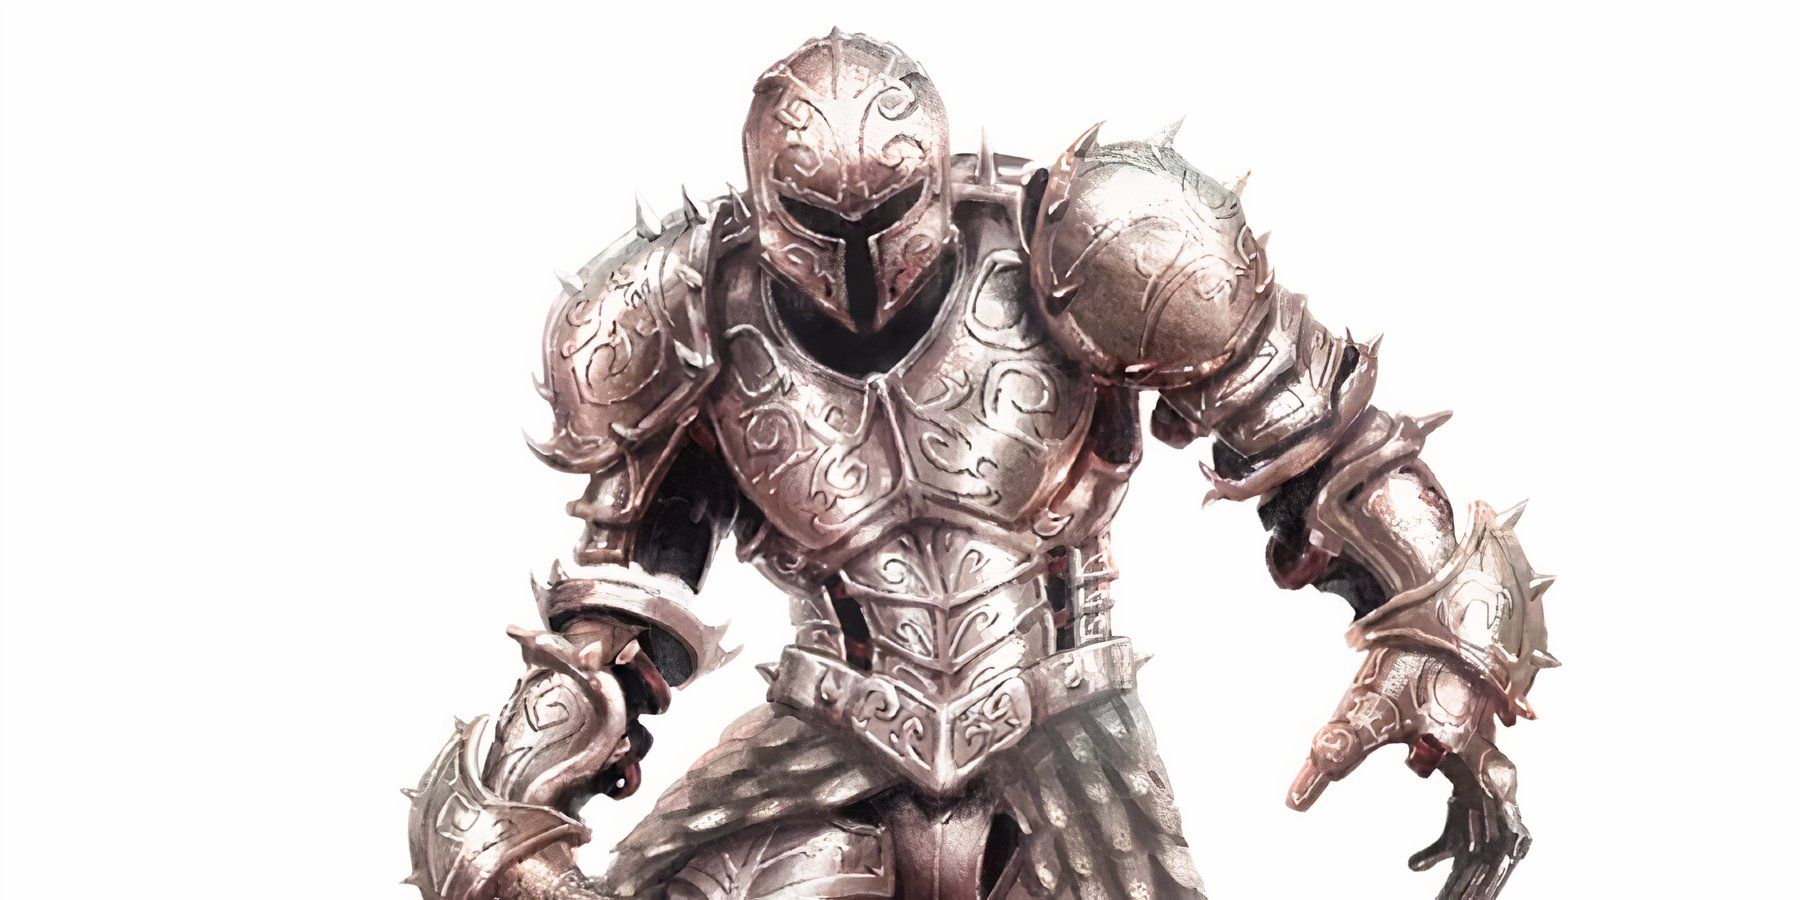 Dungeons and Dragons animated suit of armor assumes a menacing pose